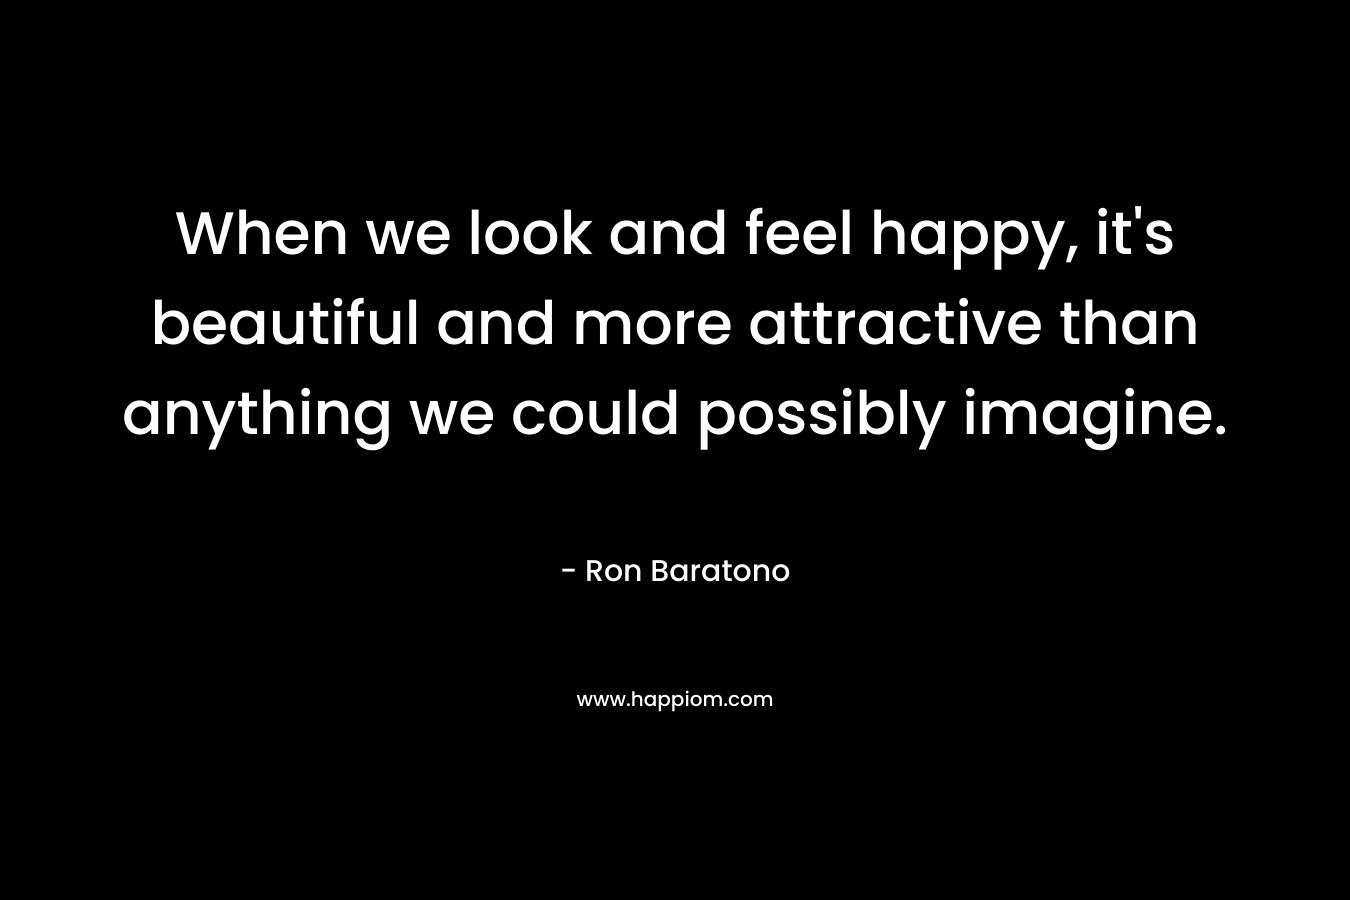 When we look and feel happy, it's beautiful and more attractive than anything we could possibly imagine.